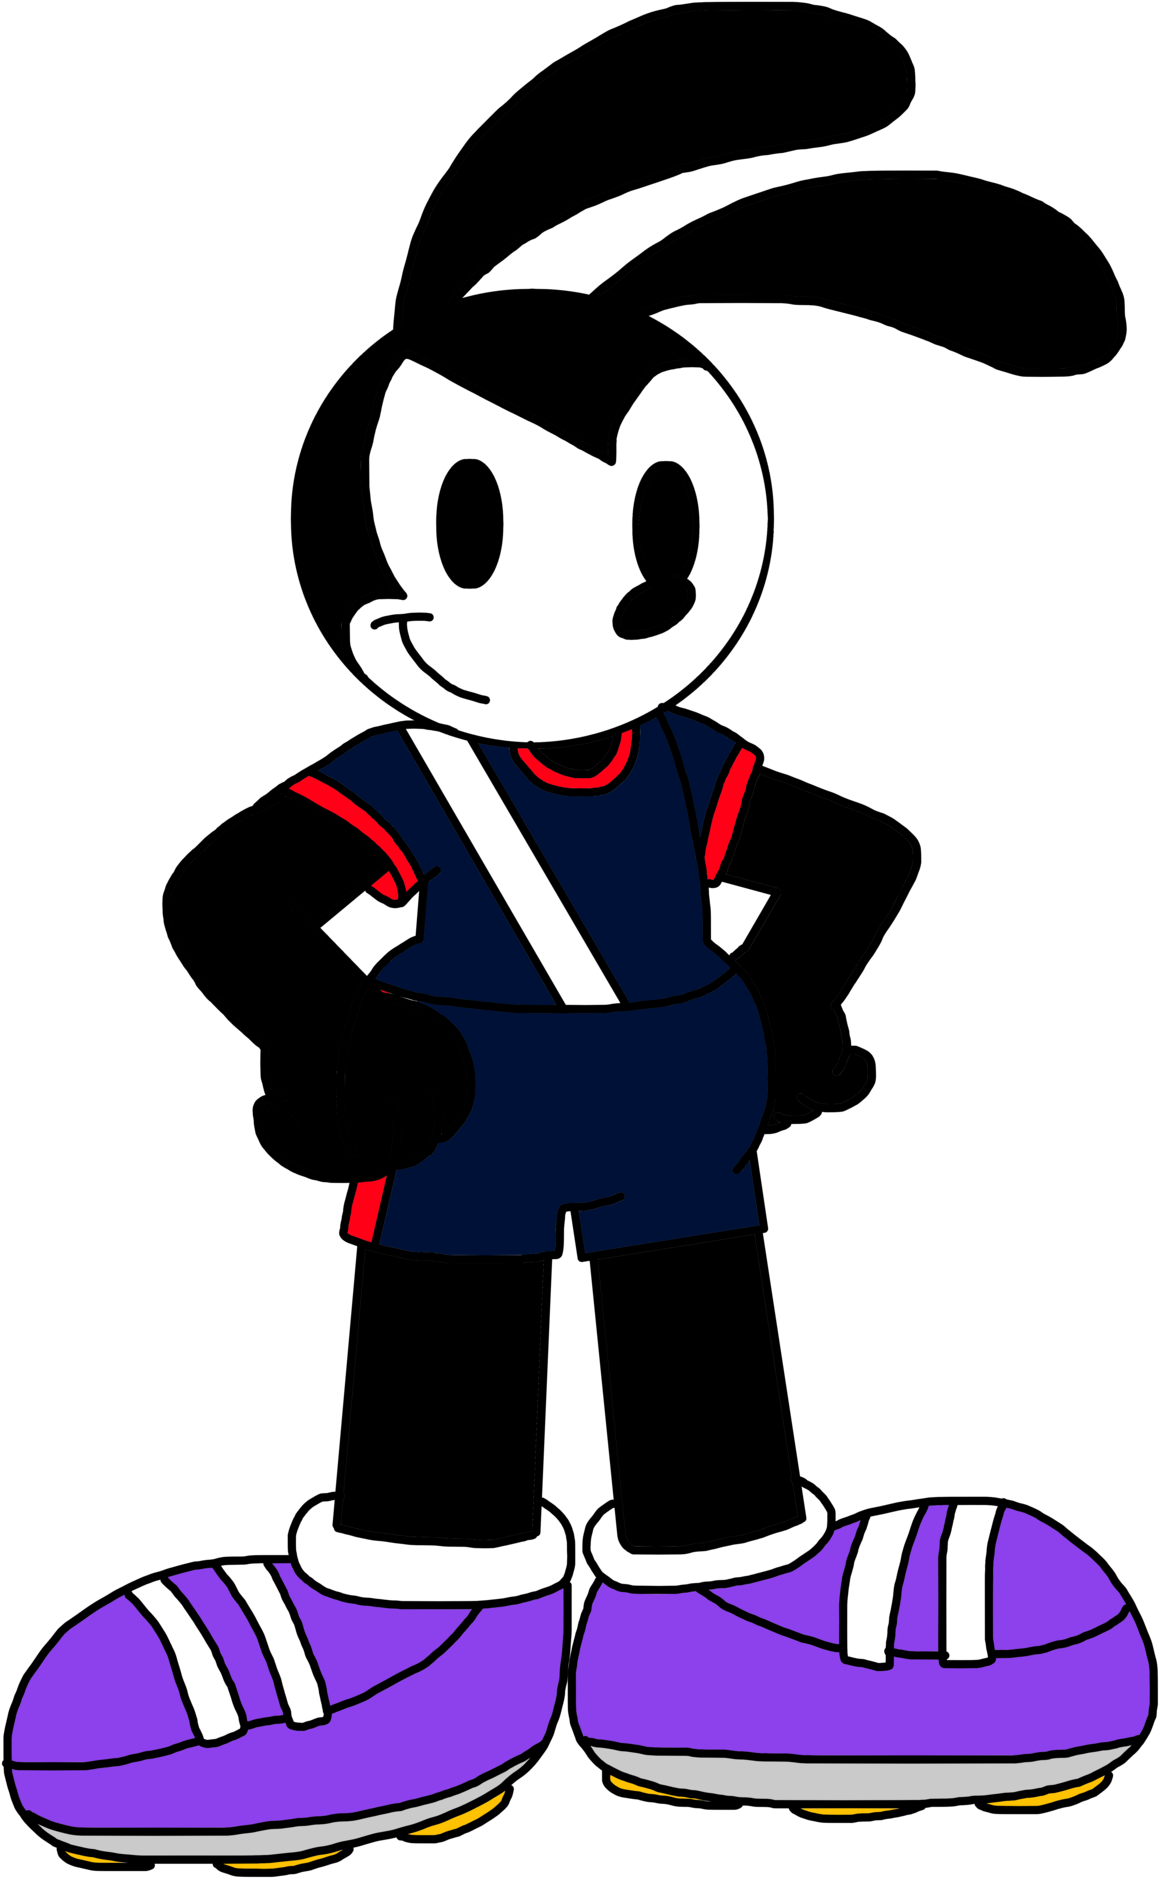 Thehawkeyestudio 21 10 Oswald As Usa Soccer Team By - United States Men's National Soccer Team (1600x2085)